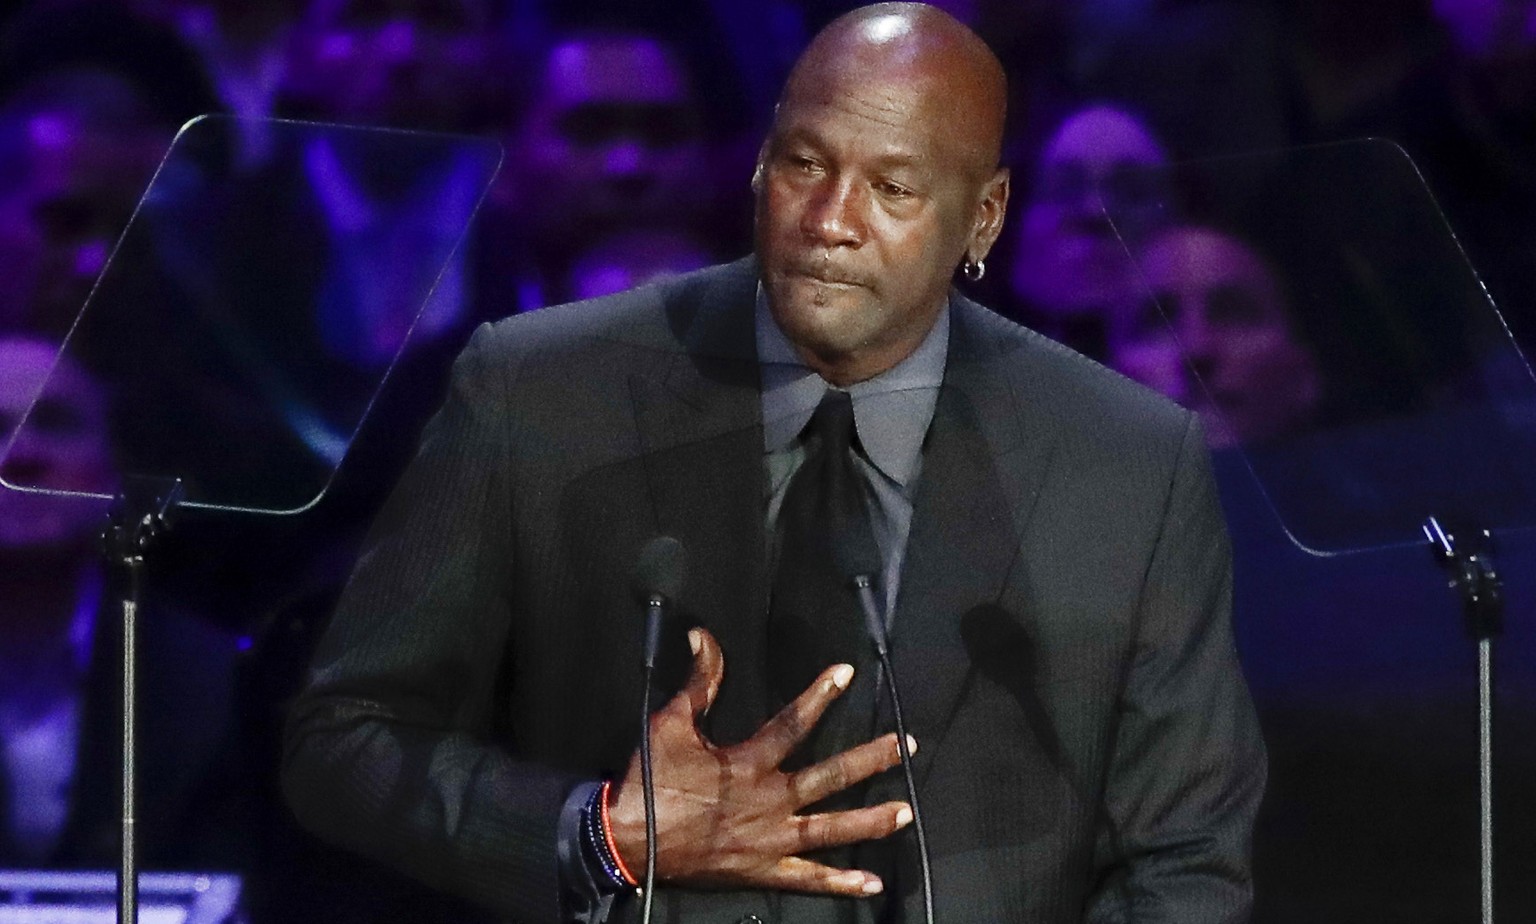 FILE - In this Feb. 24, 2020, file photo, former NBA player Michael Jordan reacts while speaking during a celebration of life for Kobe Bryant and his daughter Gianna in Los Angeles. Jordan is &quot;de ...